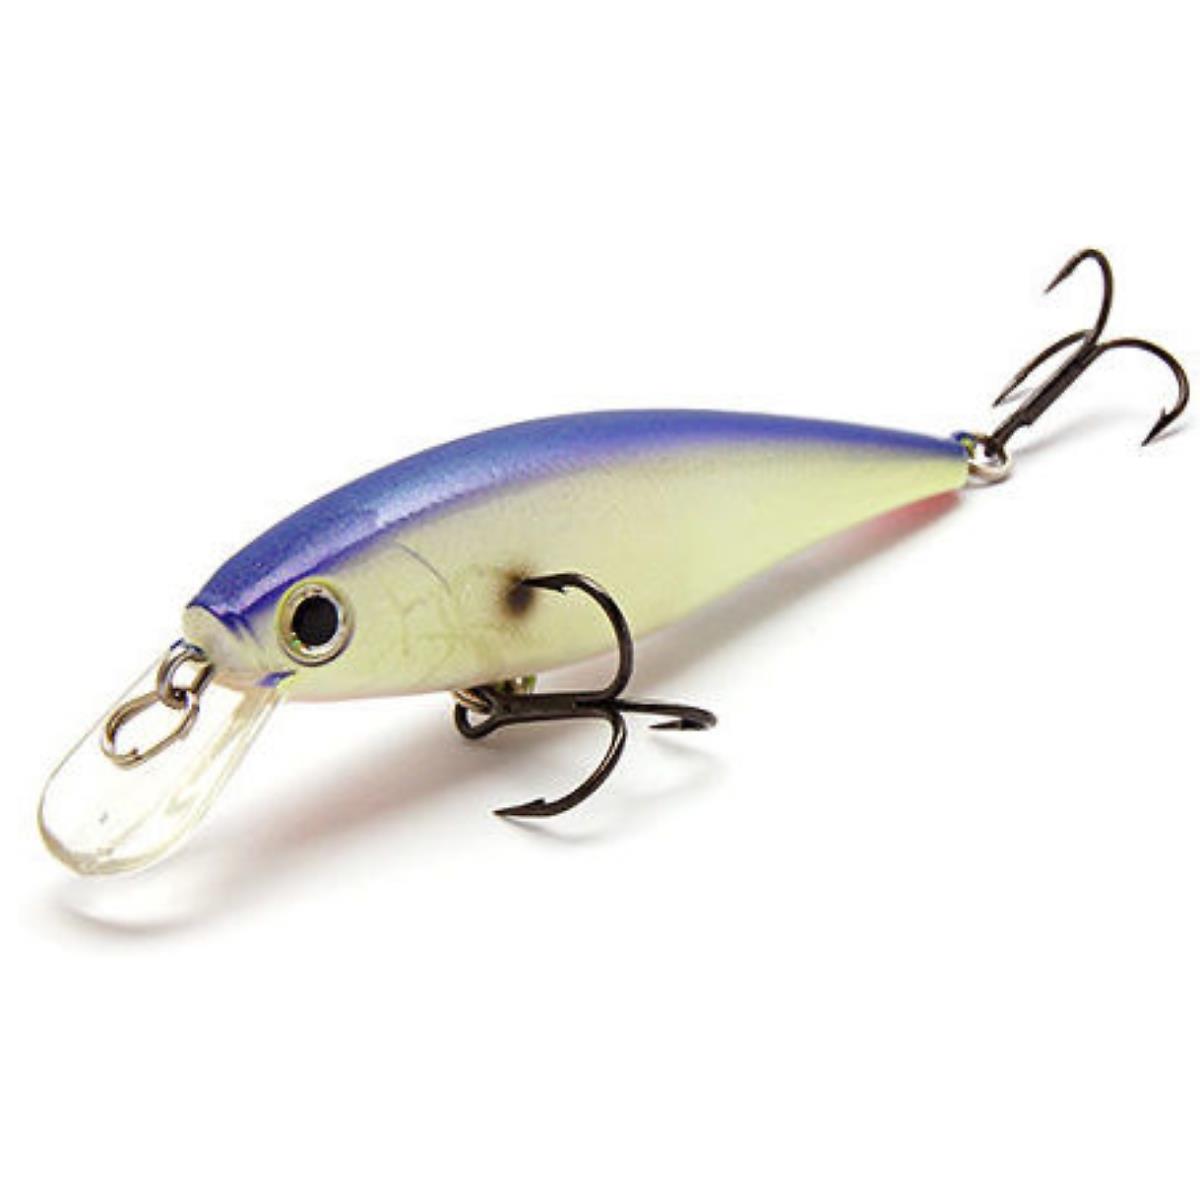 Воблер Pointer 78-261 Table Rock Shad Lucky Craft finesse rock